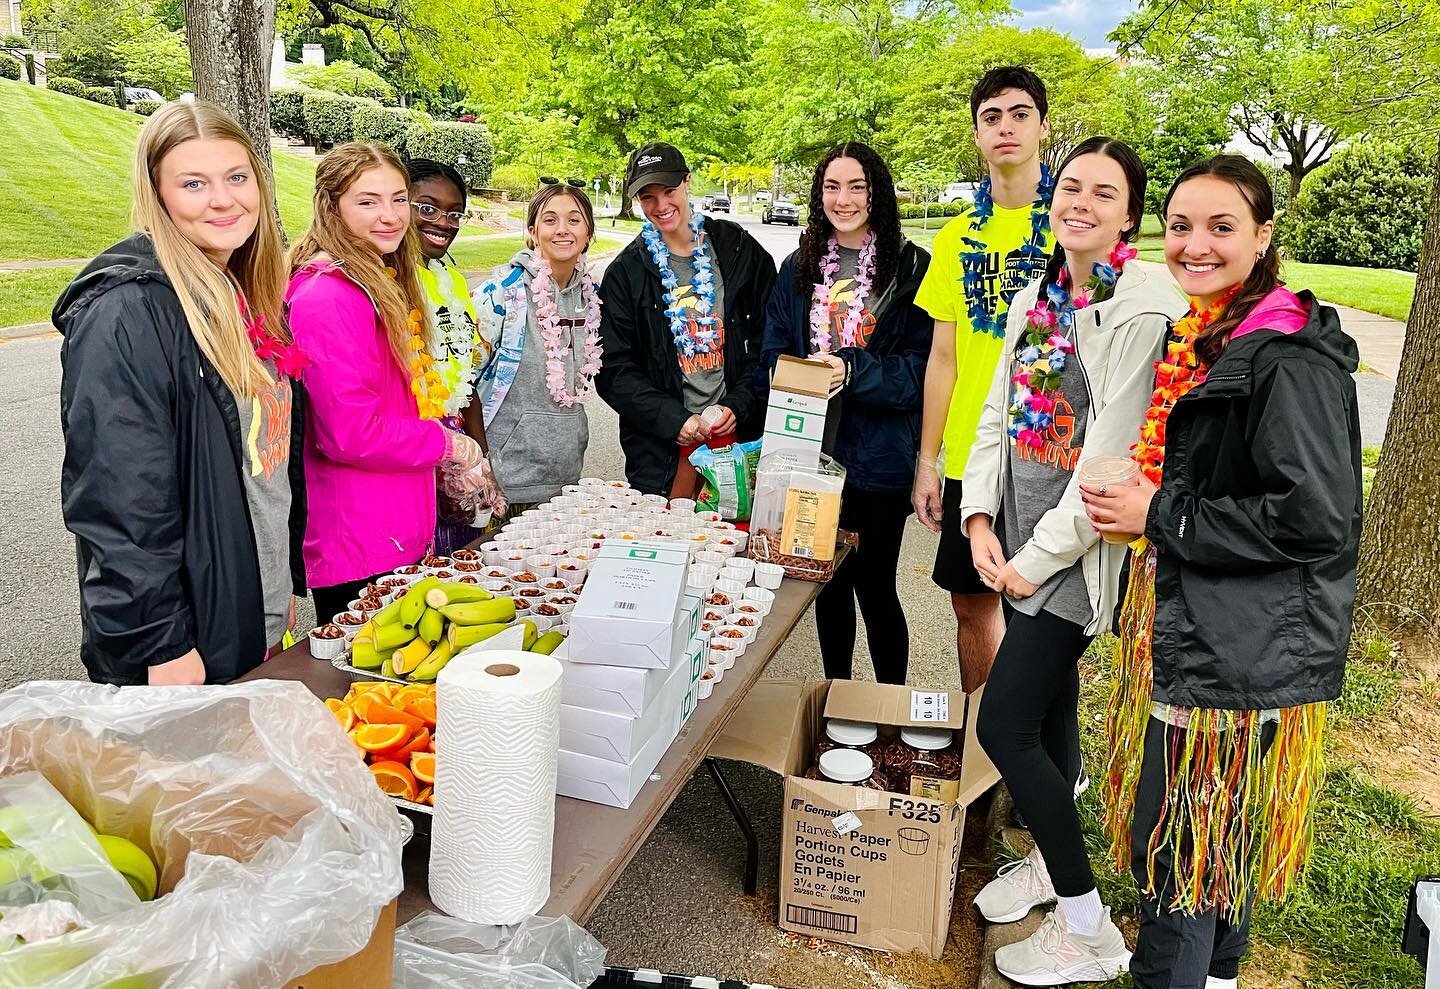 Our 🌺 Luau-themed 🌺 Aid Station was cut short by the storm, but we had a blast until then! The Teen Ambassadors were up bright and early to support this great event 👏🏻 We salute all the runners and hope you are proud of yourselves! 
@blueridgemar